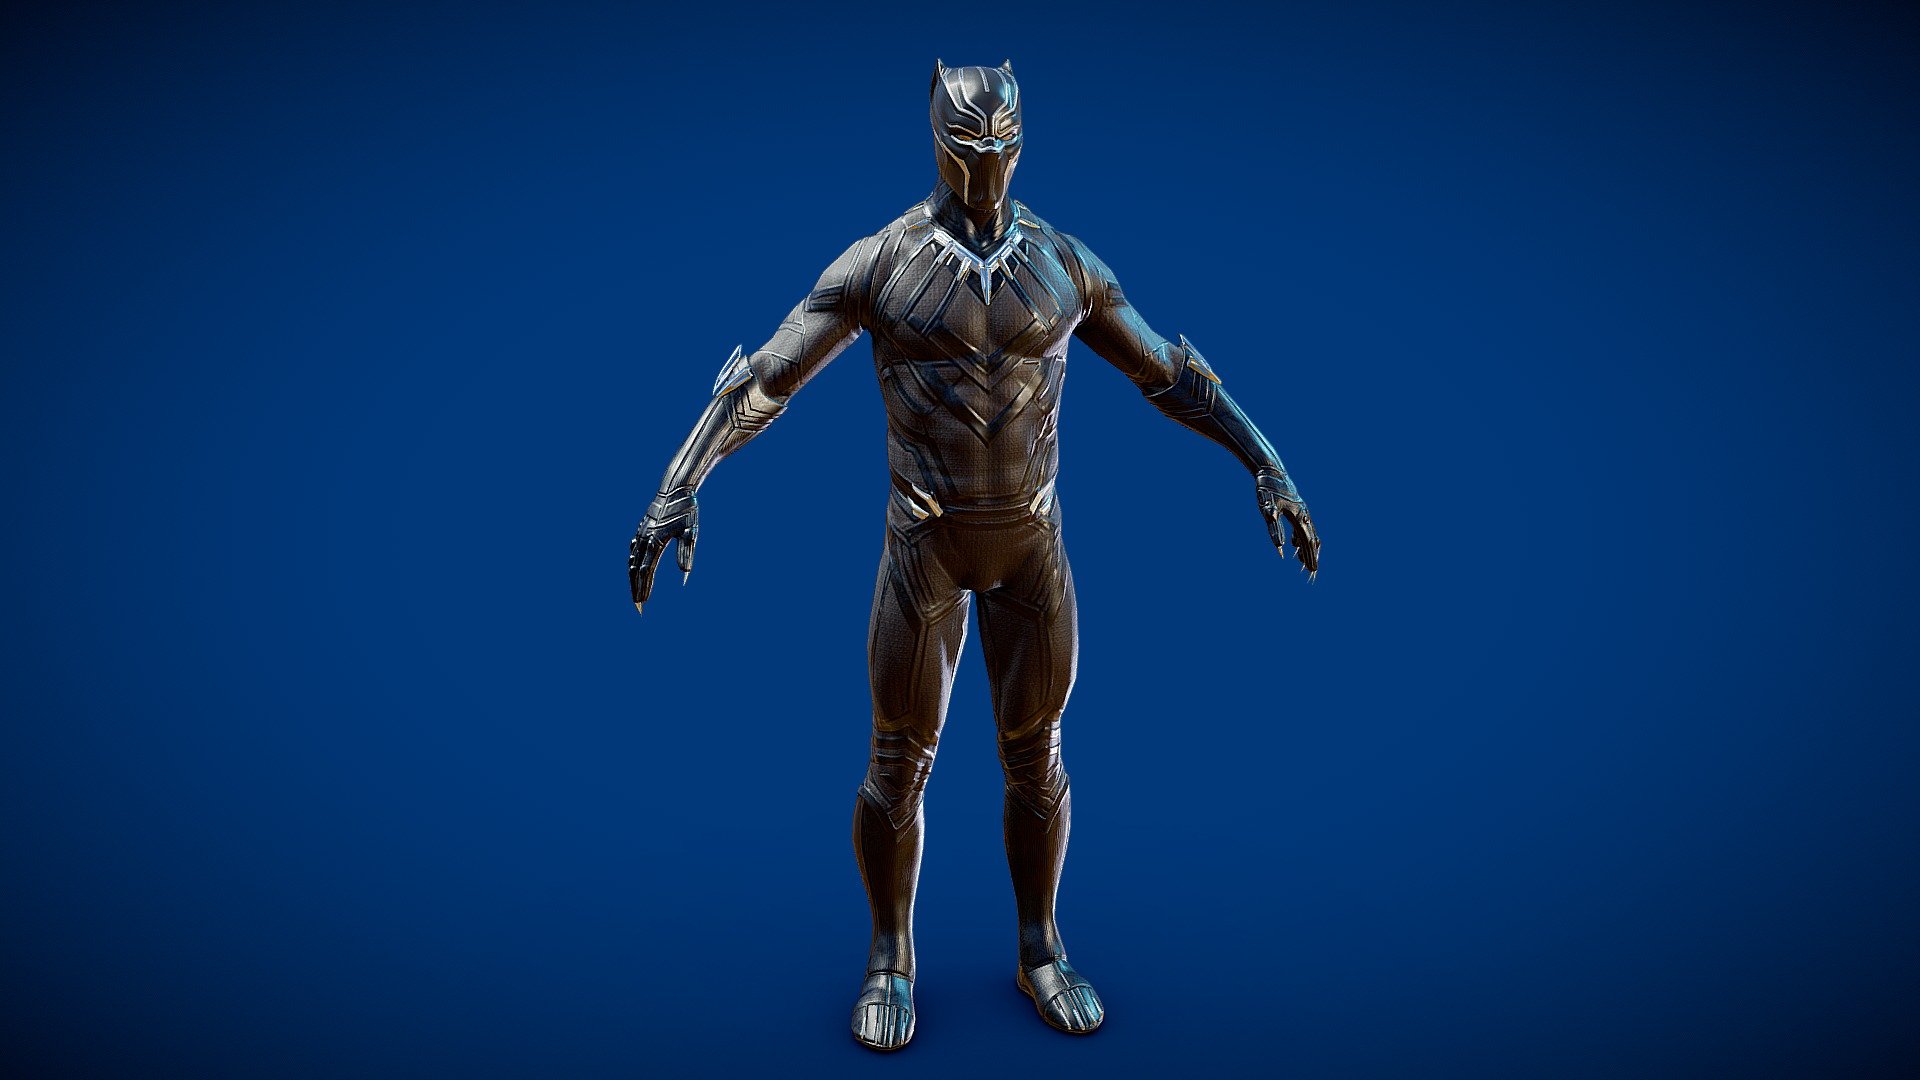 Black Panther WIP. Modeled for an AR app with the Marvel License. I didn't quite get to finishing this but I liked the direction it was going in. Hopefully I can find the time to finish it 3d model